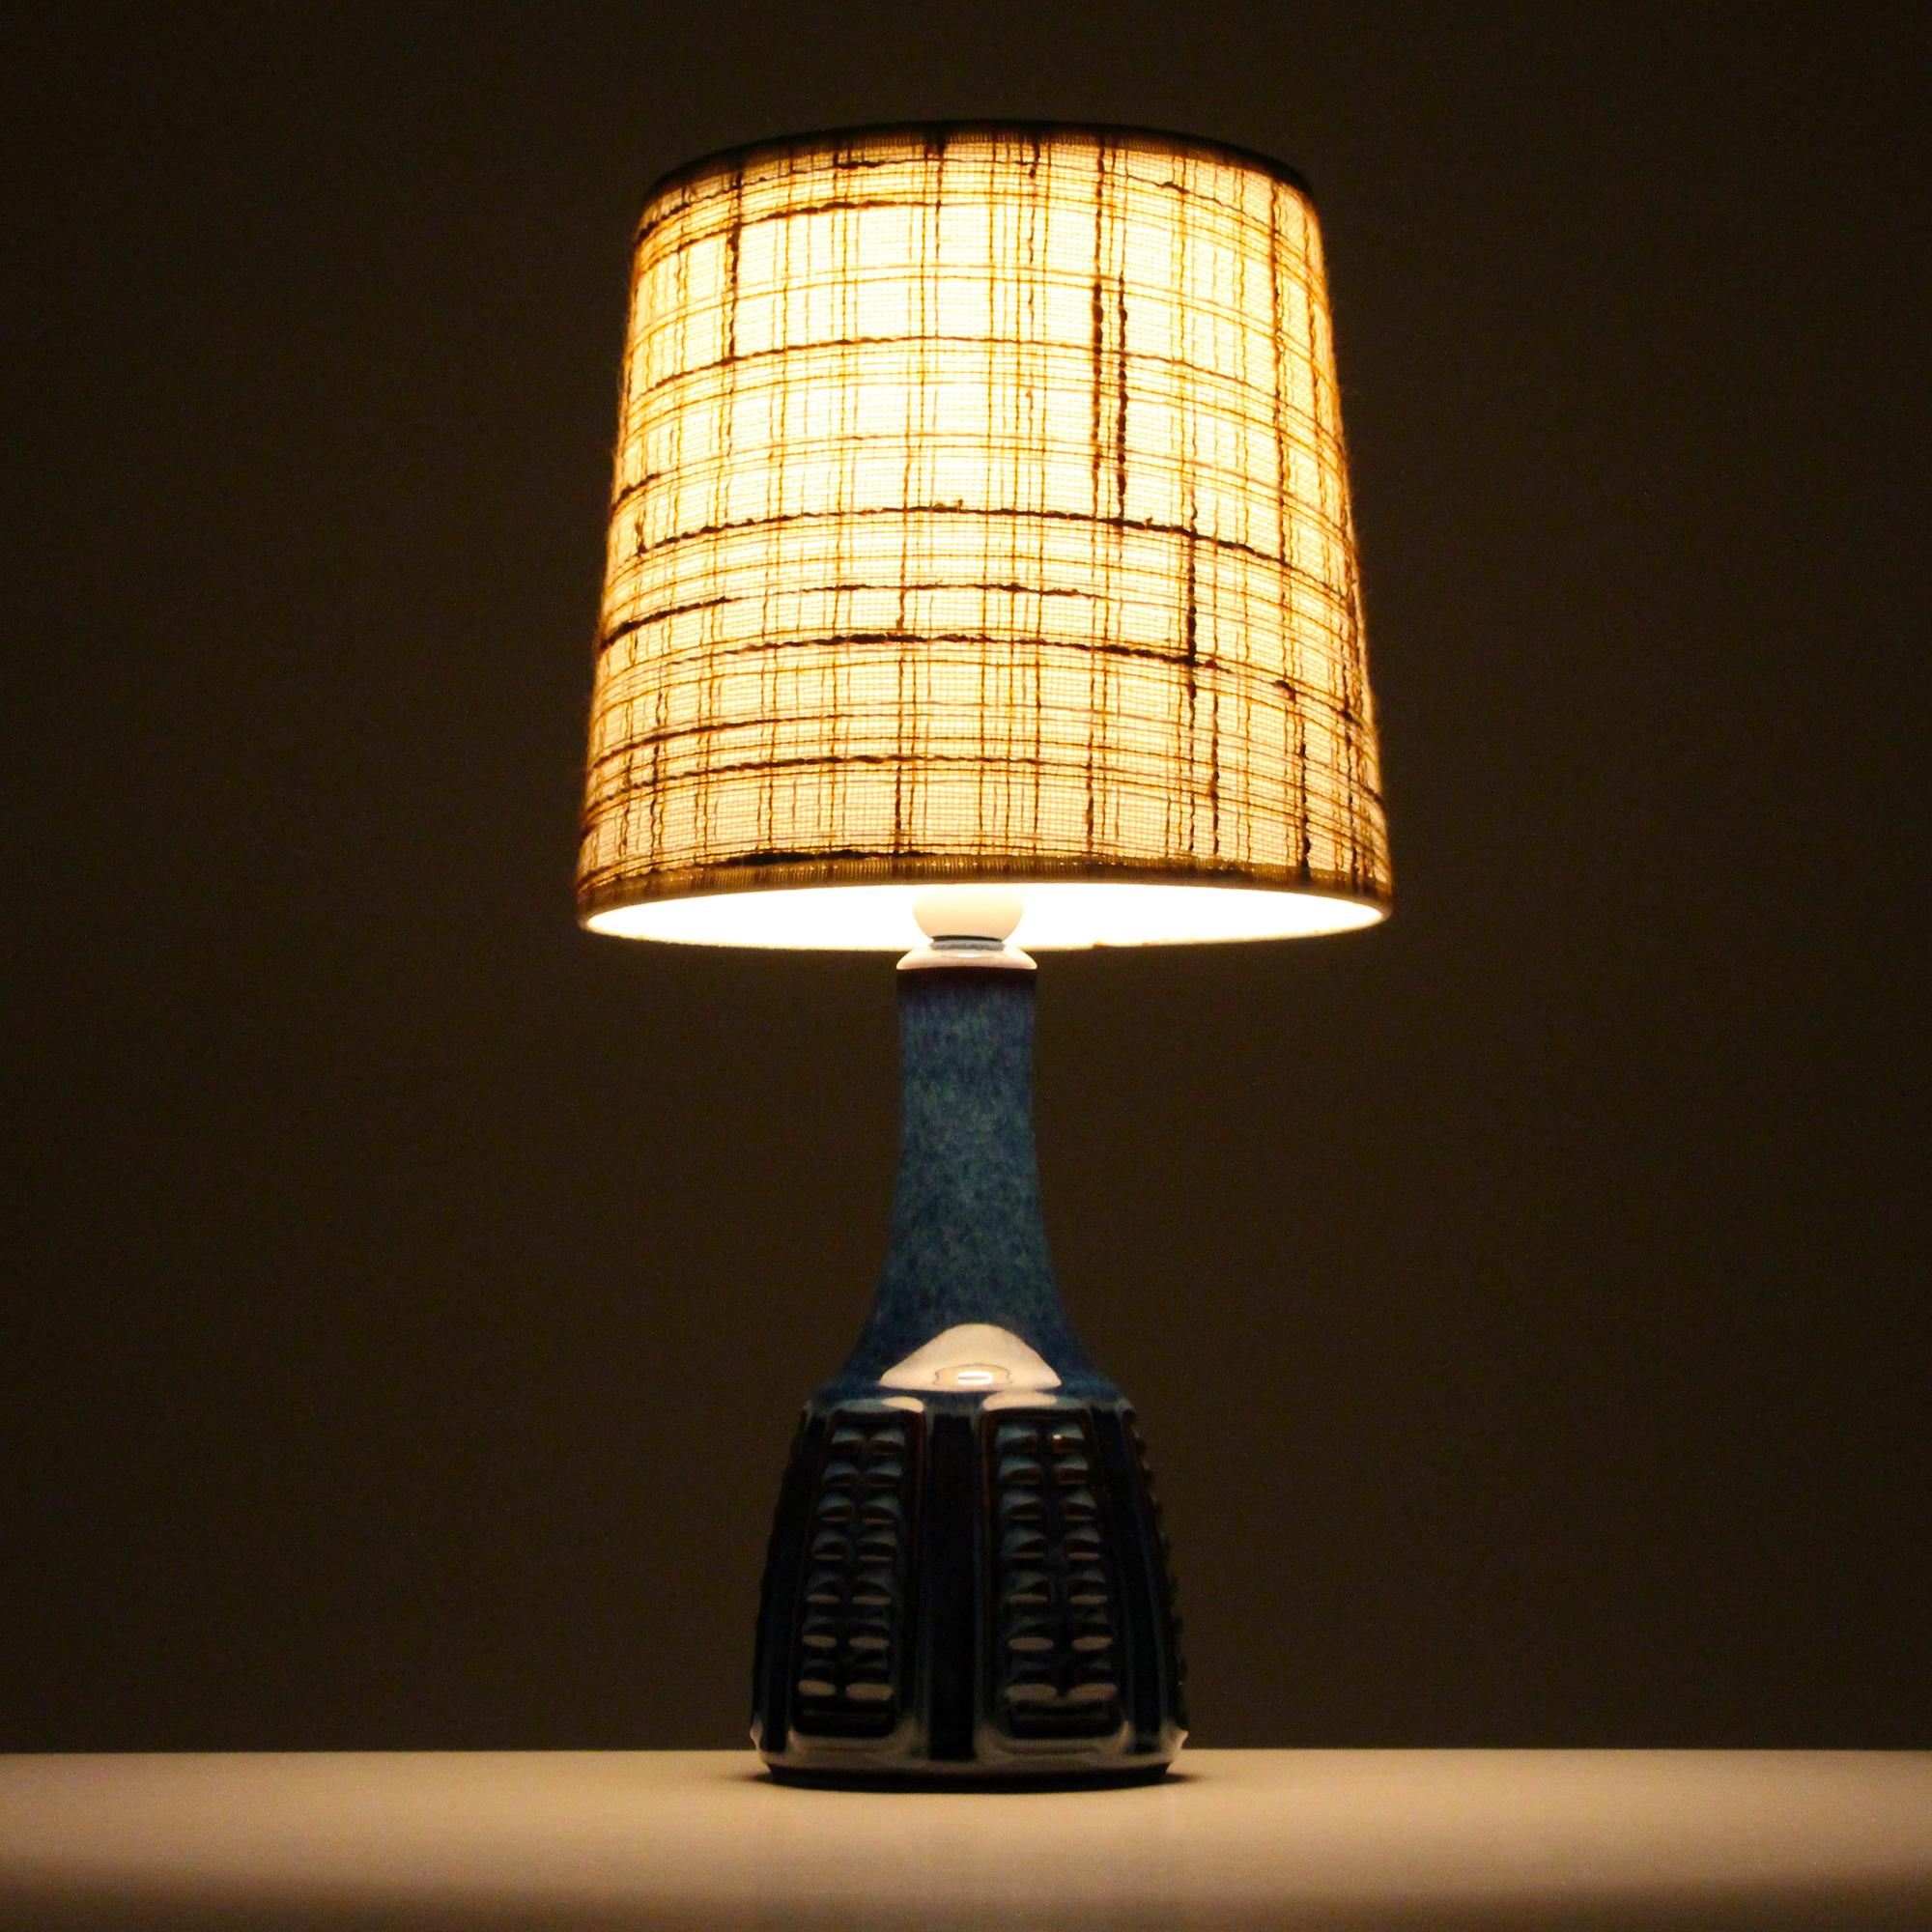 Danish Blue Table Lamp by Einar Johansen for Soholm 1960s, with Vintage Shade Included